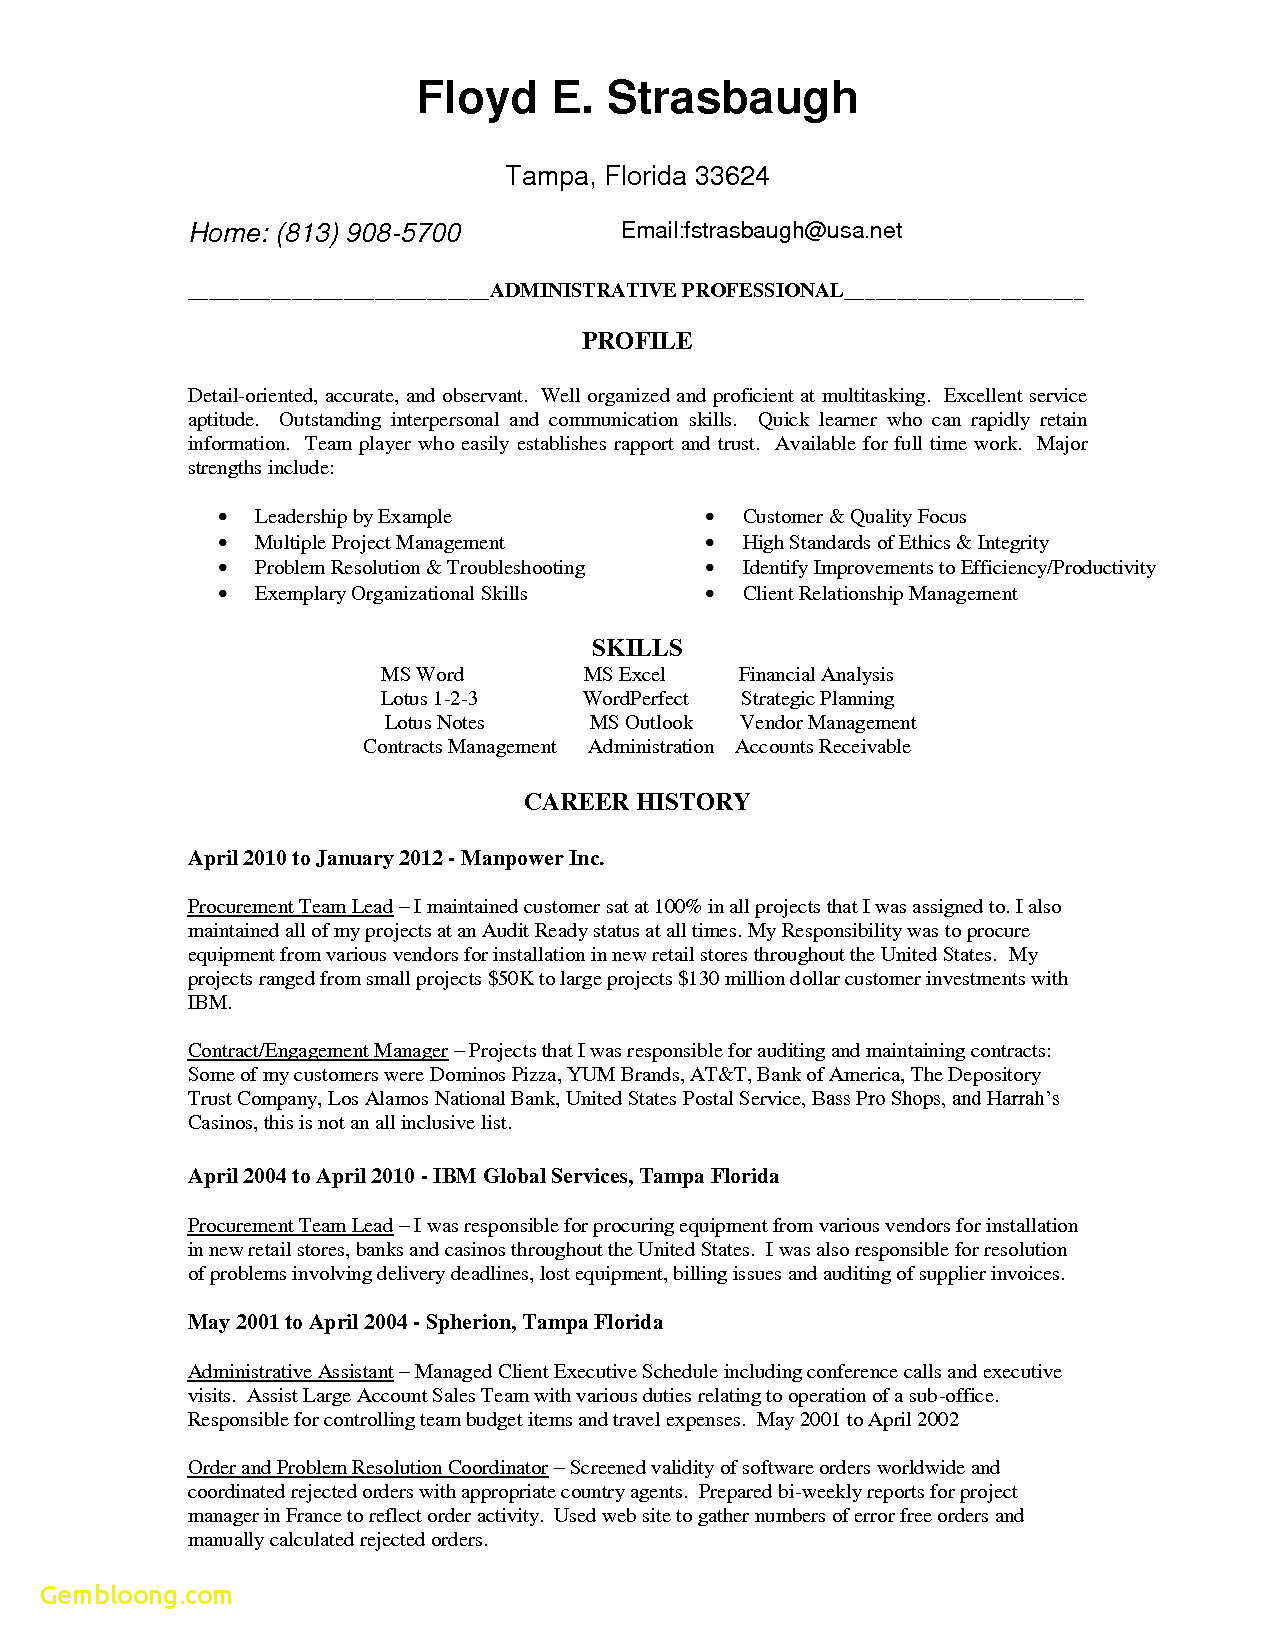 Letter to Insurance Company Template - Insurance Resume Templates Download now Professional Job Resume